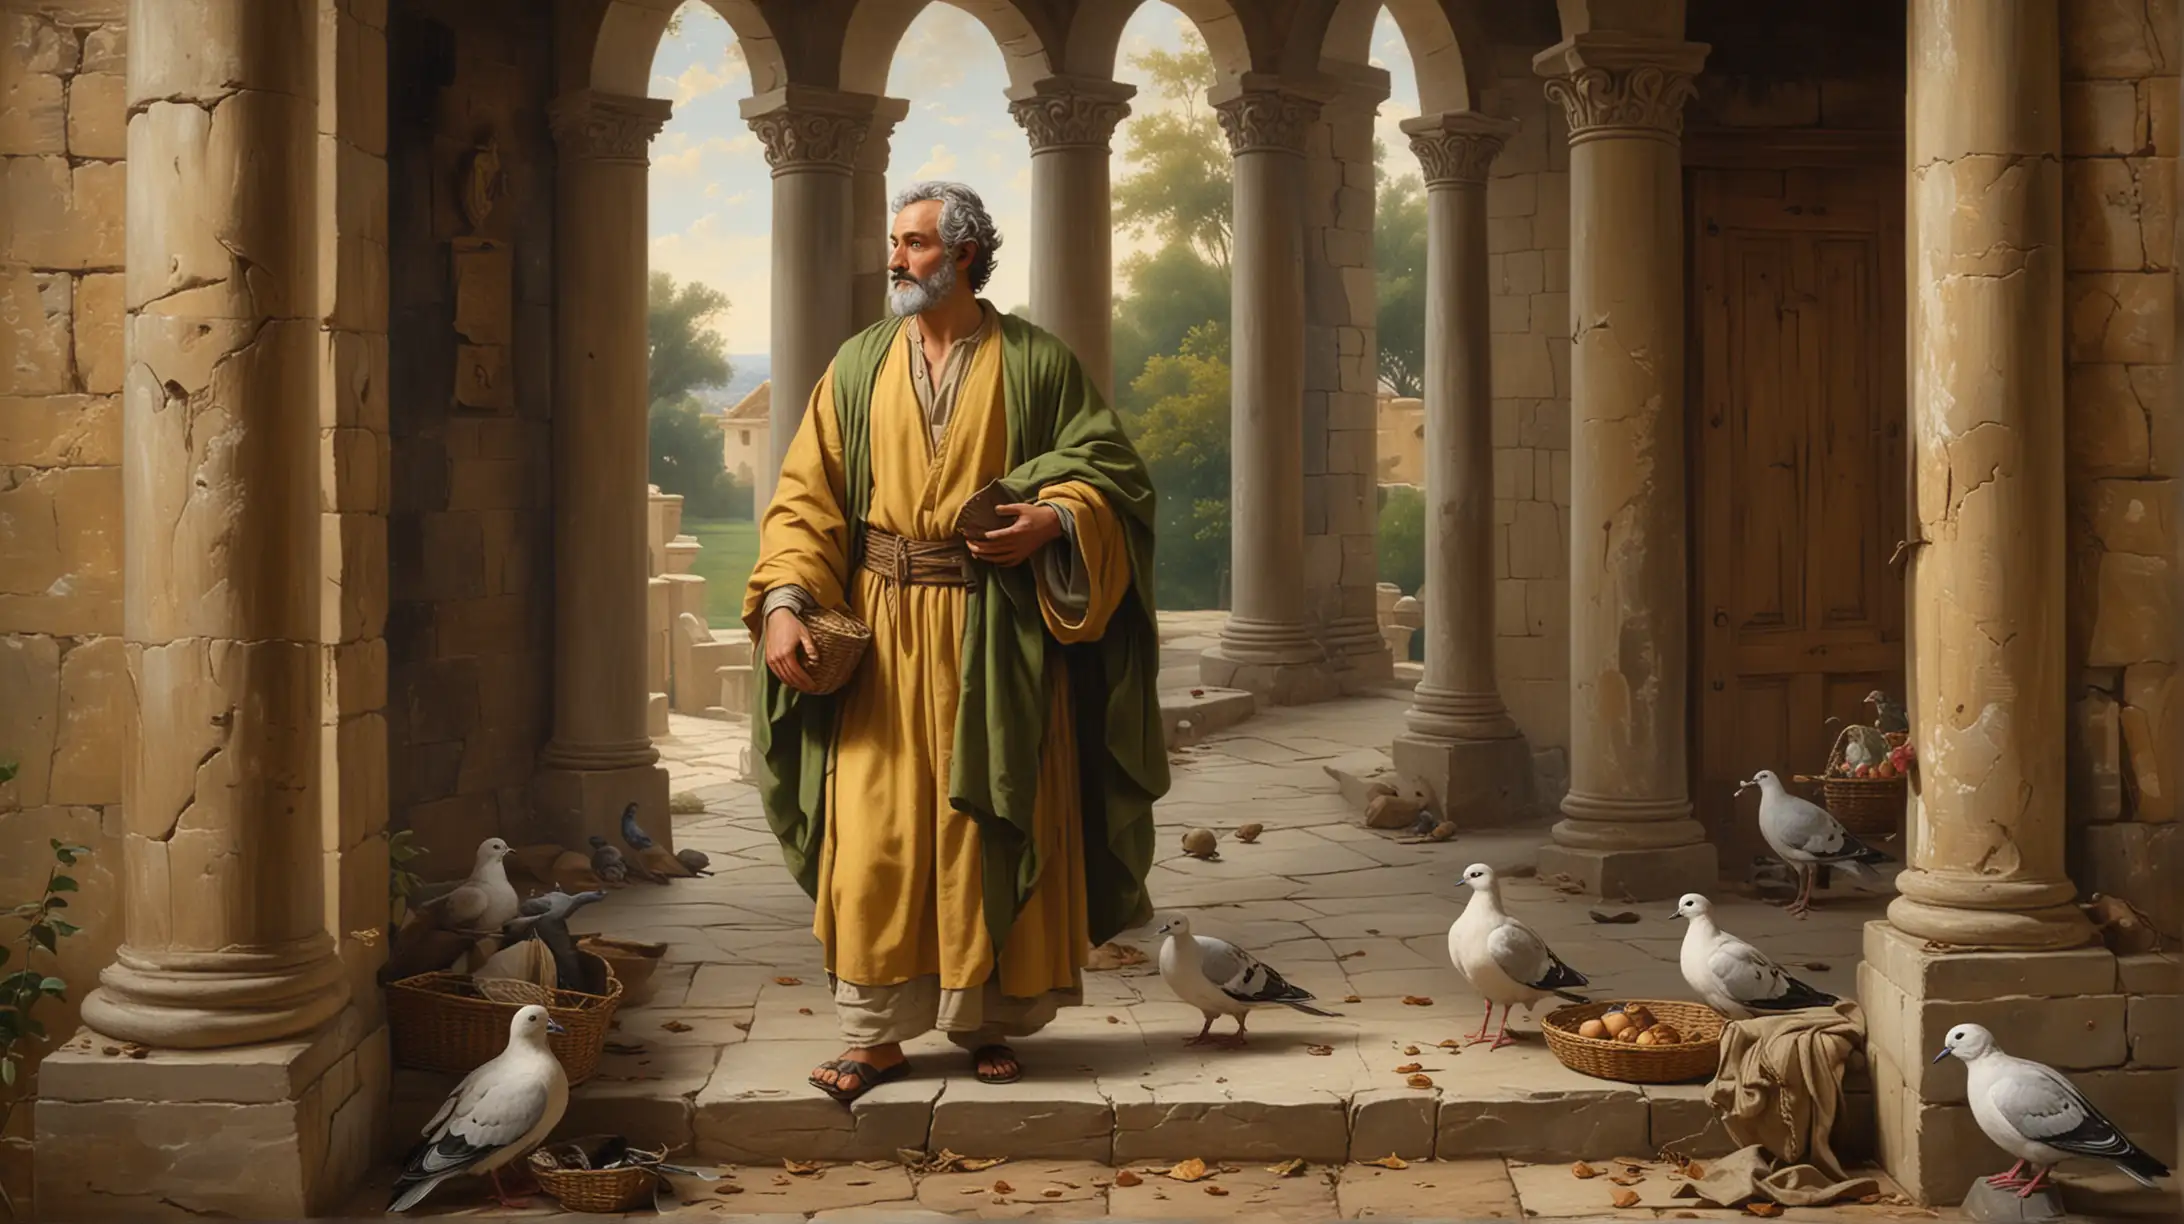 The painting depicts Saint Joseph. The scene is set within the temple, suggested by the arched stone doorway and the worn stone walls.

Central Figure

Saint Joseph: We are seeing the left-side-view of Saint Joseph who is a very handsome young man in his early thirties with short black curly hair and a short black beard, standing wearing sandals, wearing a dark yellow mantle over a green robe. He holds two turtledoves in a new low wicker basket in one hand and leaning against a long walking-staff which he is holding in the other hand.

Additional Details: 
The Temple Setting: The background features a group of men, possibly other priests or Levites, observing the event. The warm, earthy tones of the painting and the play of light and shadow create a sense of solemnity and reverence.
Symbolism:  The turtledoves held by Joseph symbolize sacrifice and purification.
Overall Impression:

The painting captures the emotional intensity and spiritual significance of the subject The expression of the figure, the symbolism, and the setting all contribute to a powerful depiction of this pivotal event.